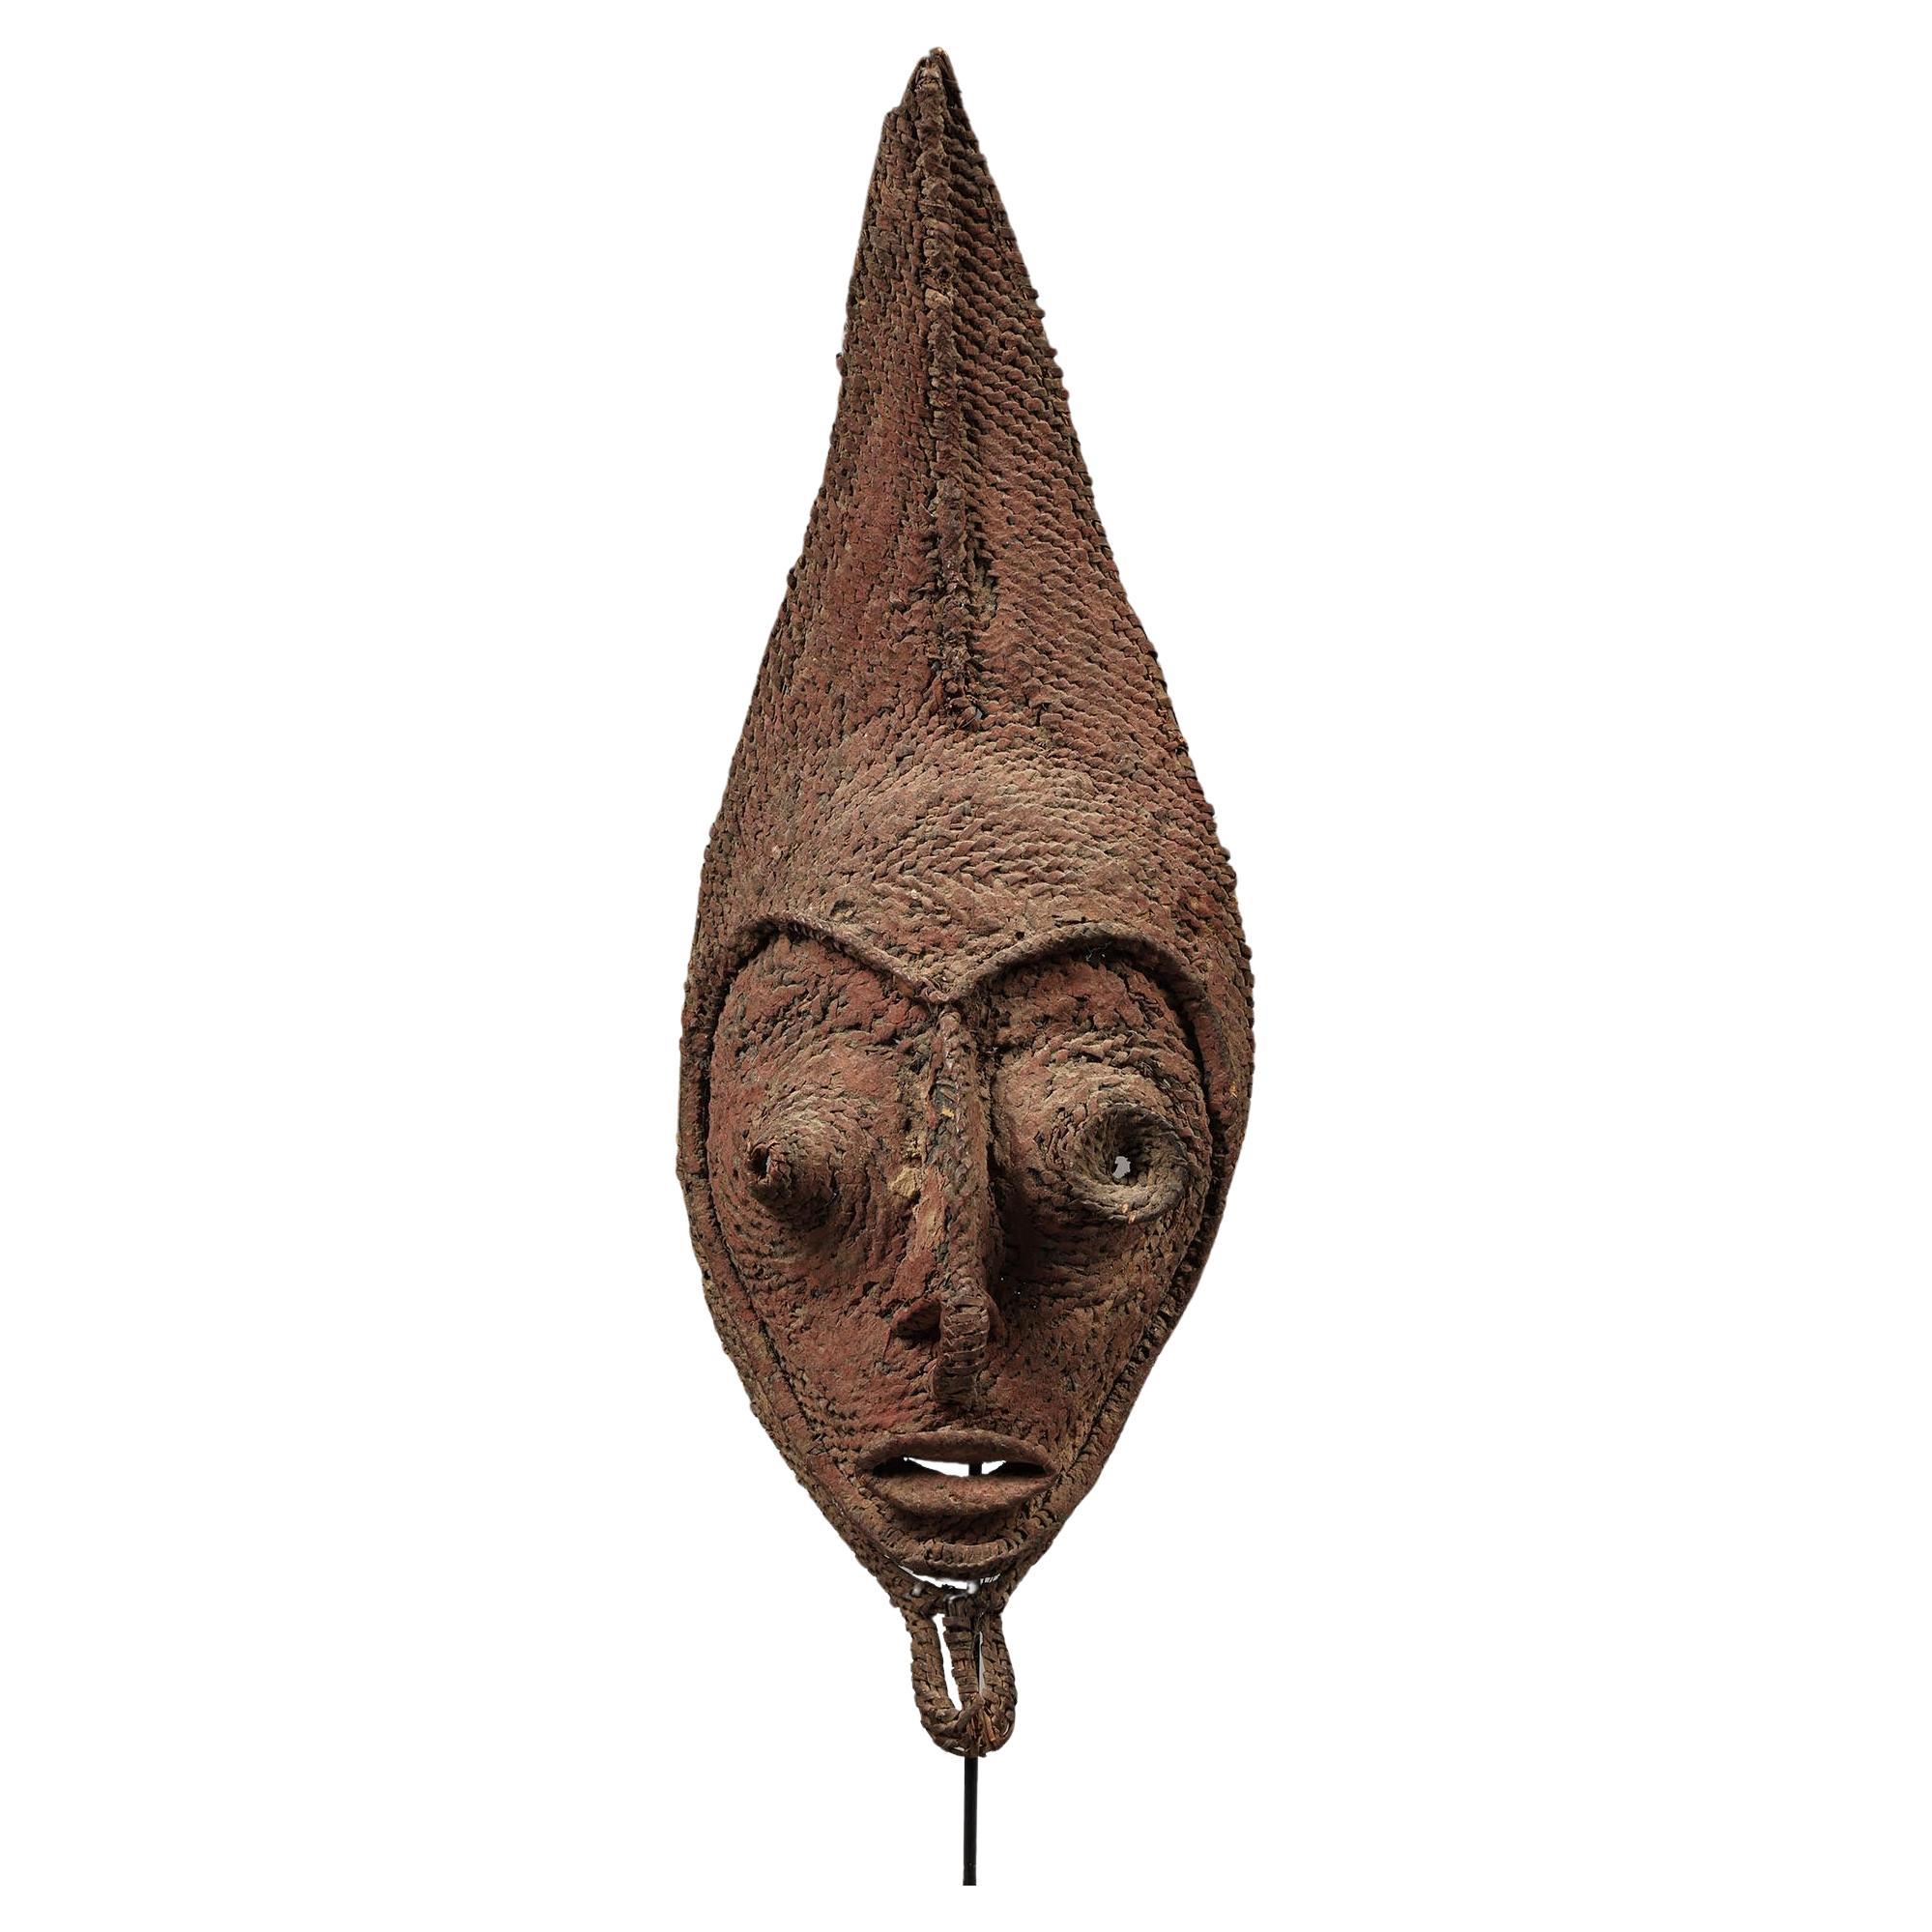 Papua New Guinean Sculptures and Carvings